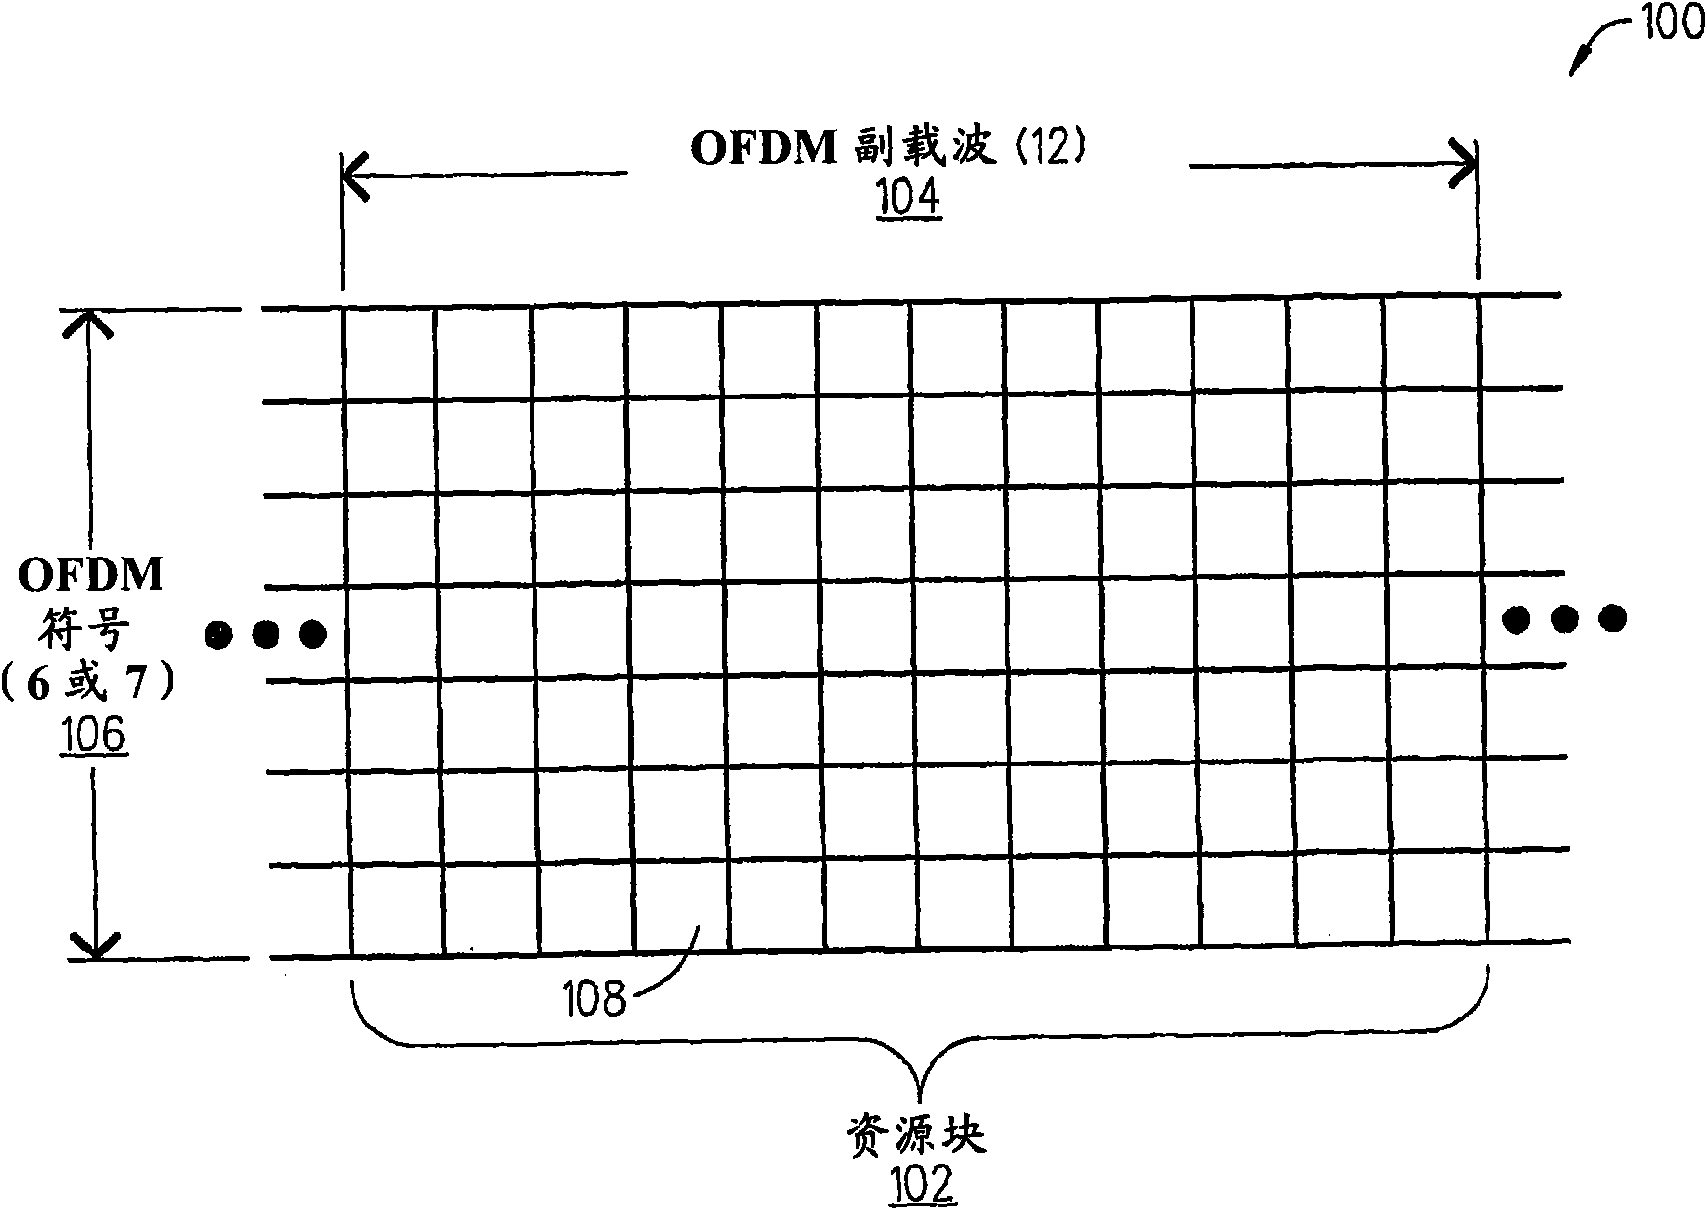 Allocating method and device for control channel data in OFDM systems